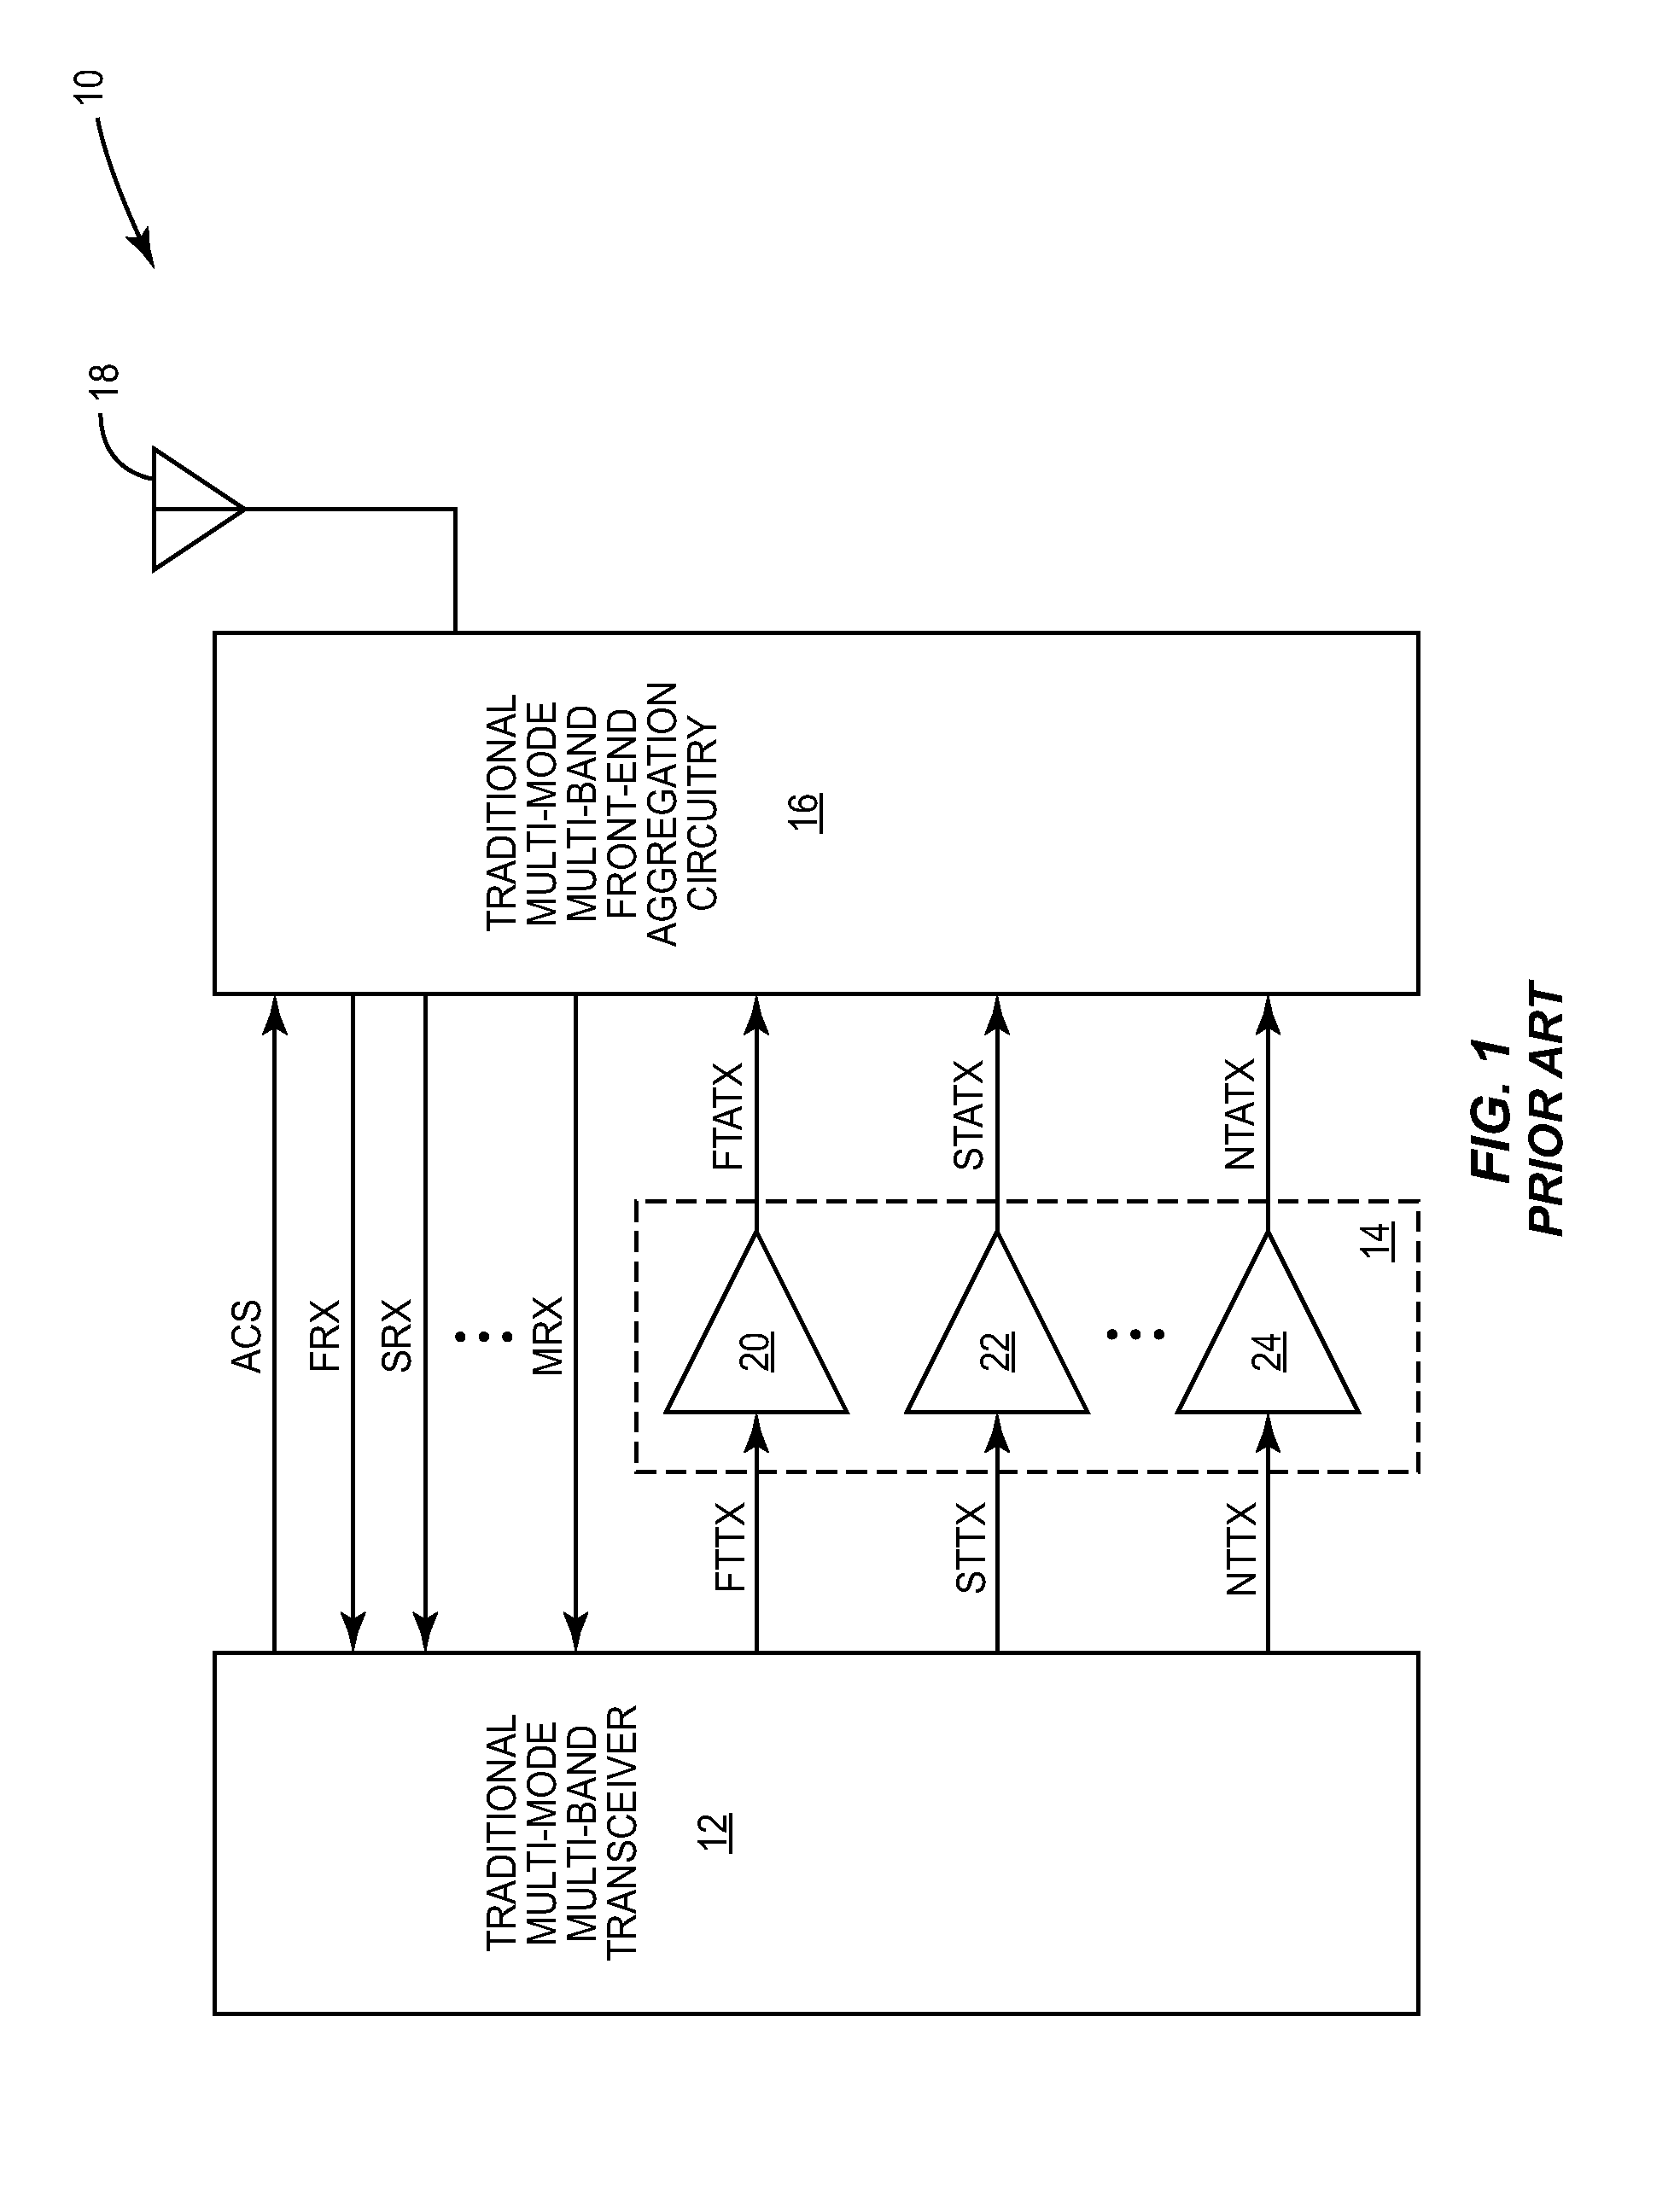 High efficiency path based power amplifier circuitry